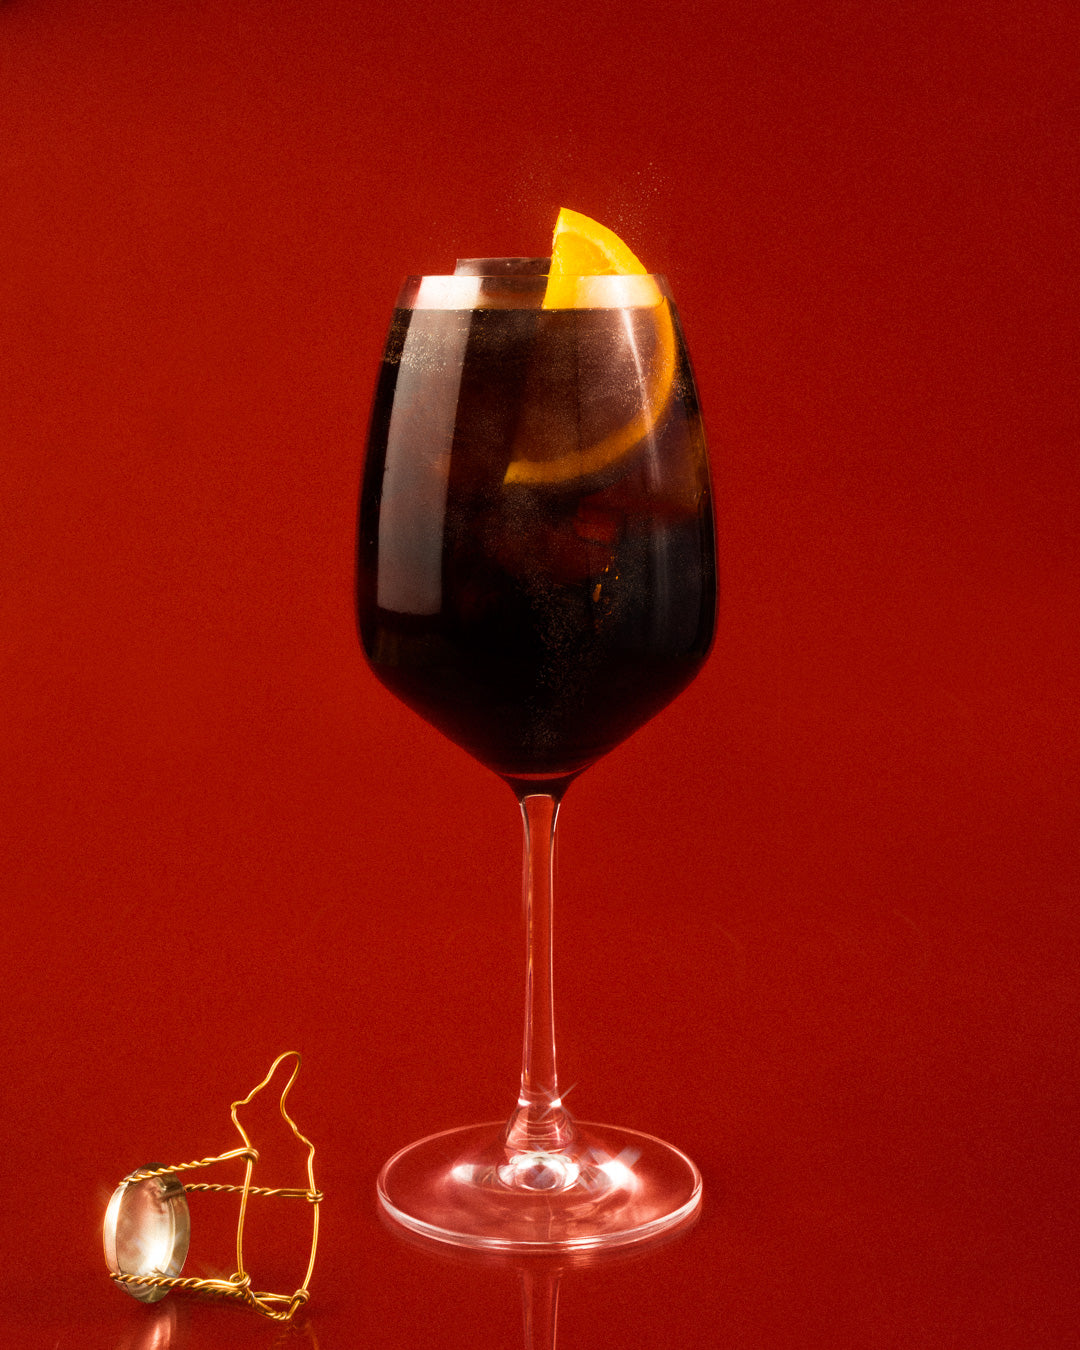 Wine glass full of brown cocktail with orange slice and champagne cork on the side